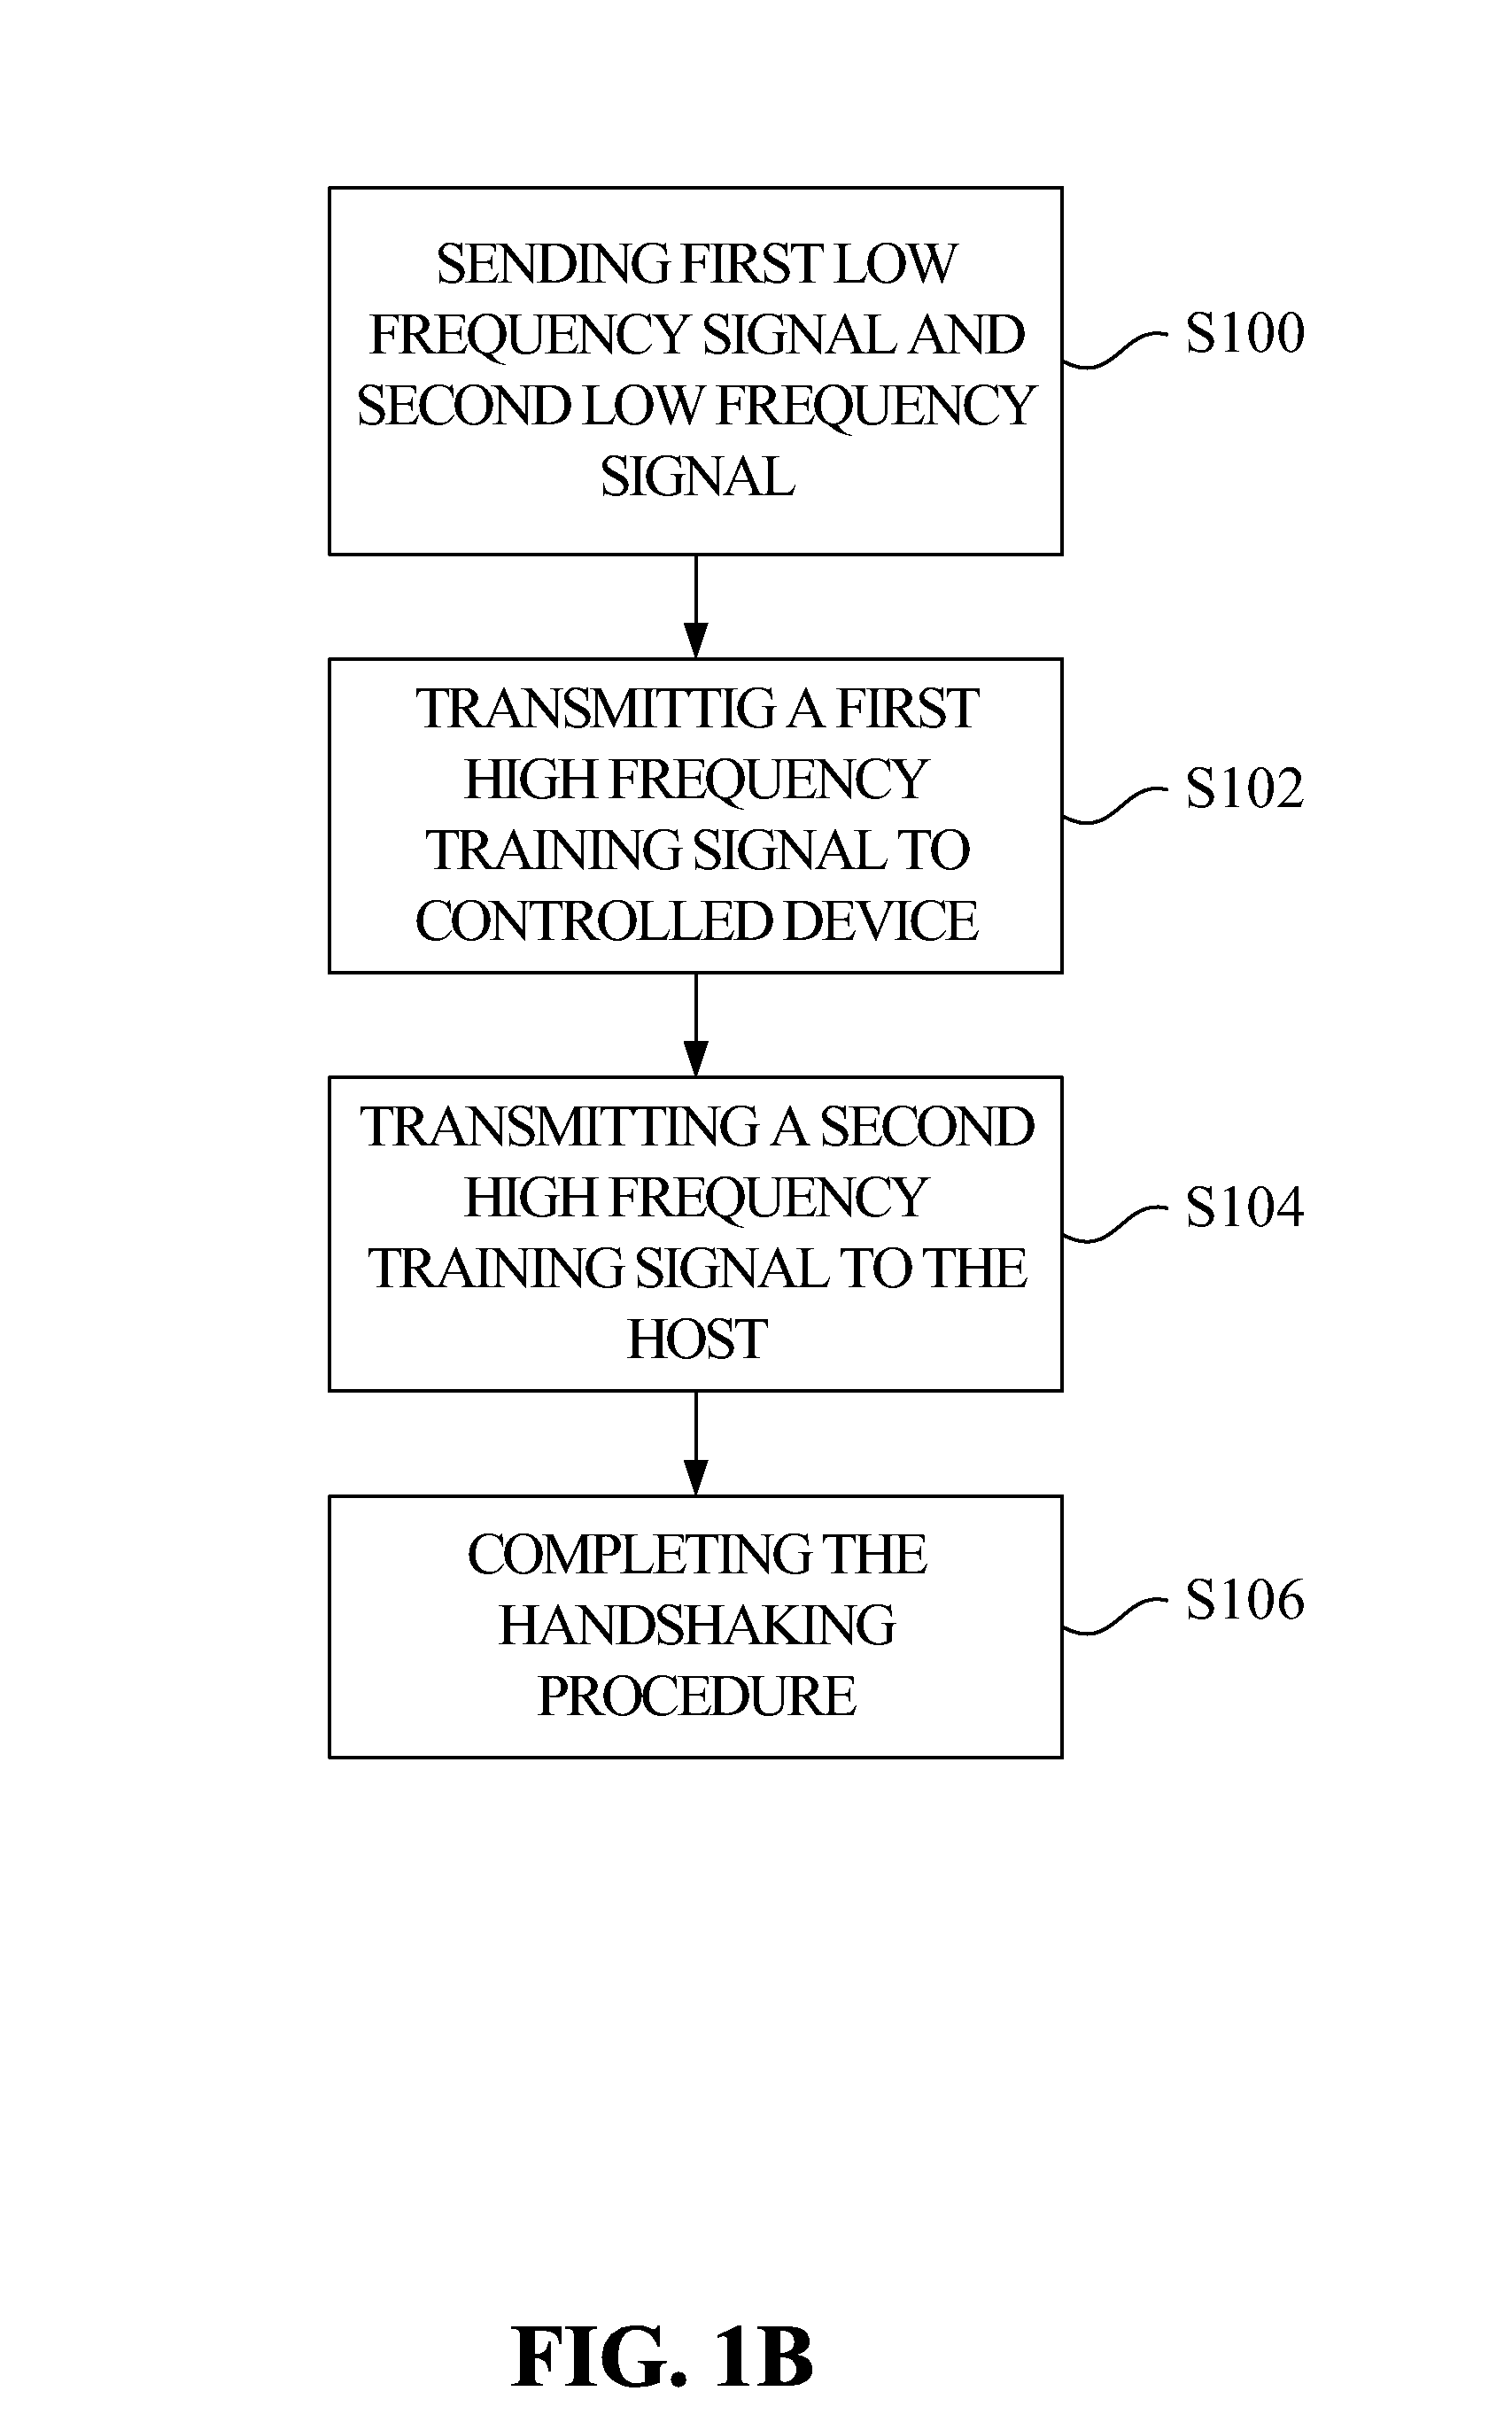 Detection method of low frequency handshaking signal